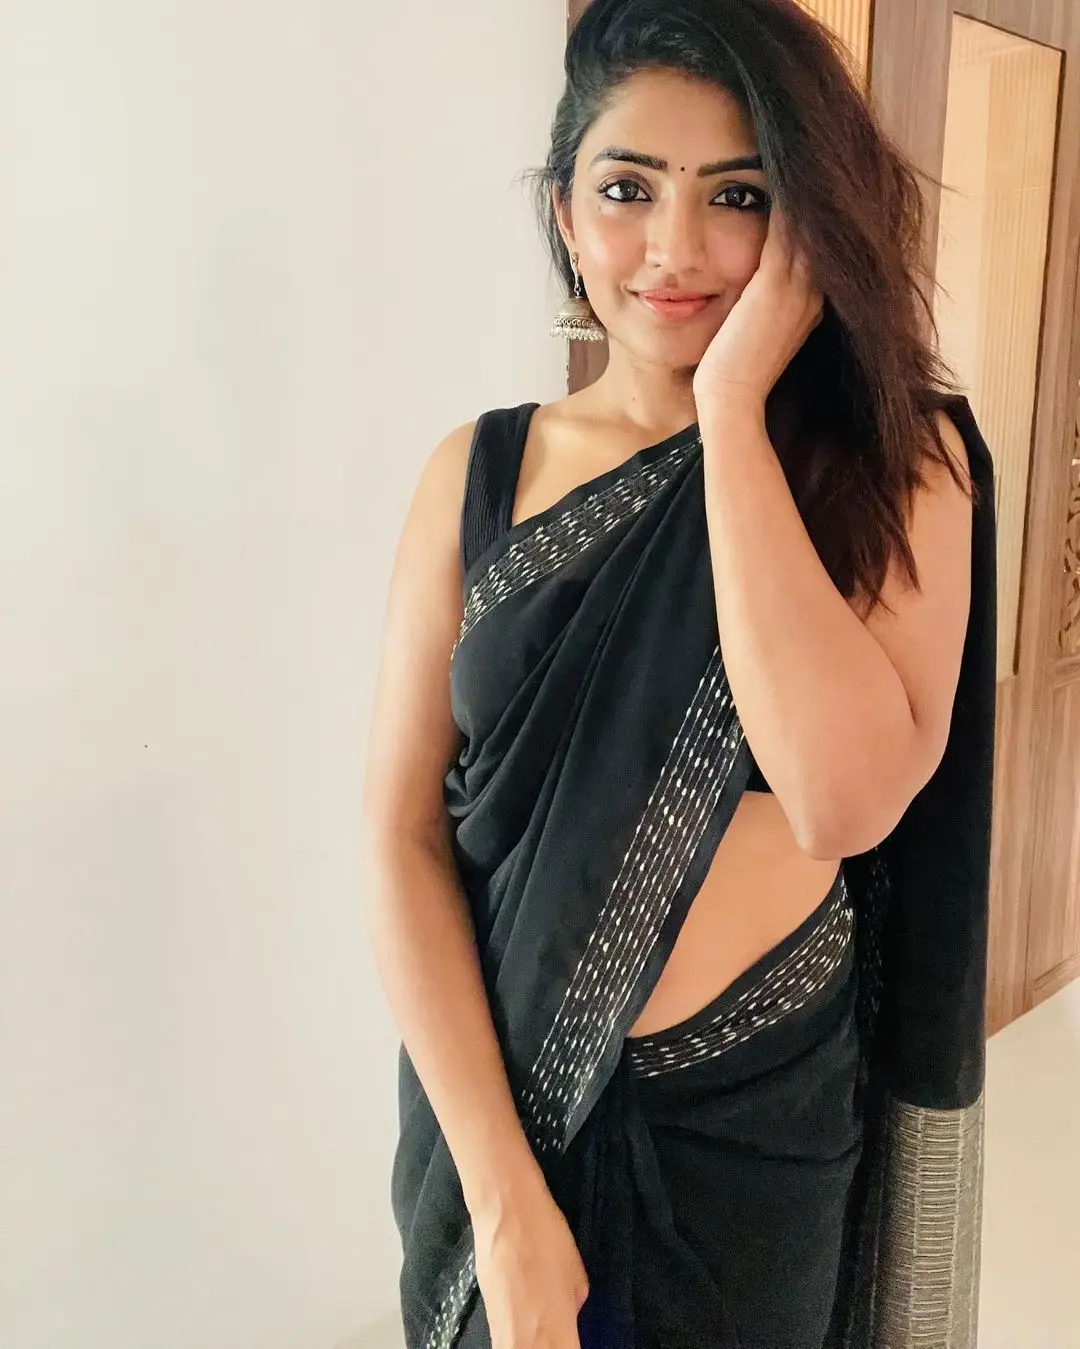 EESHA REBBA IN INDIAN TRADITIONAL BLACK SAREE SLEEVELESS BLOUSE 2